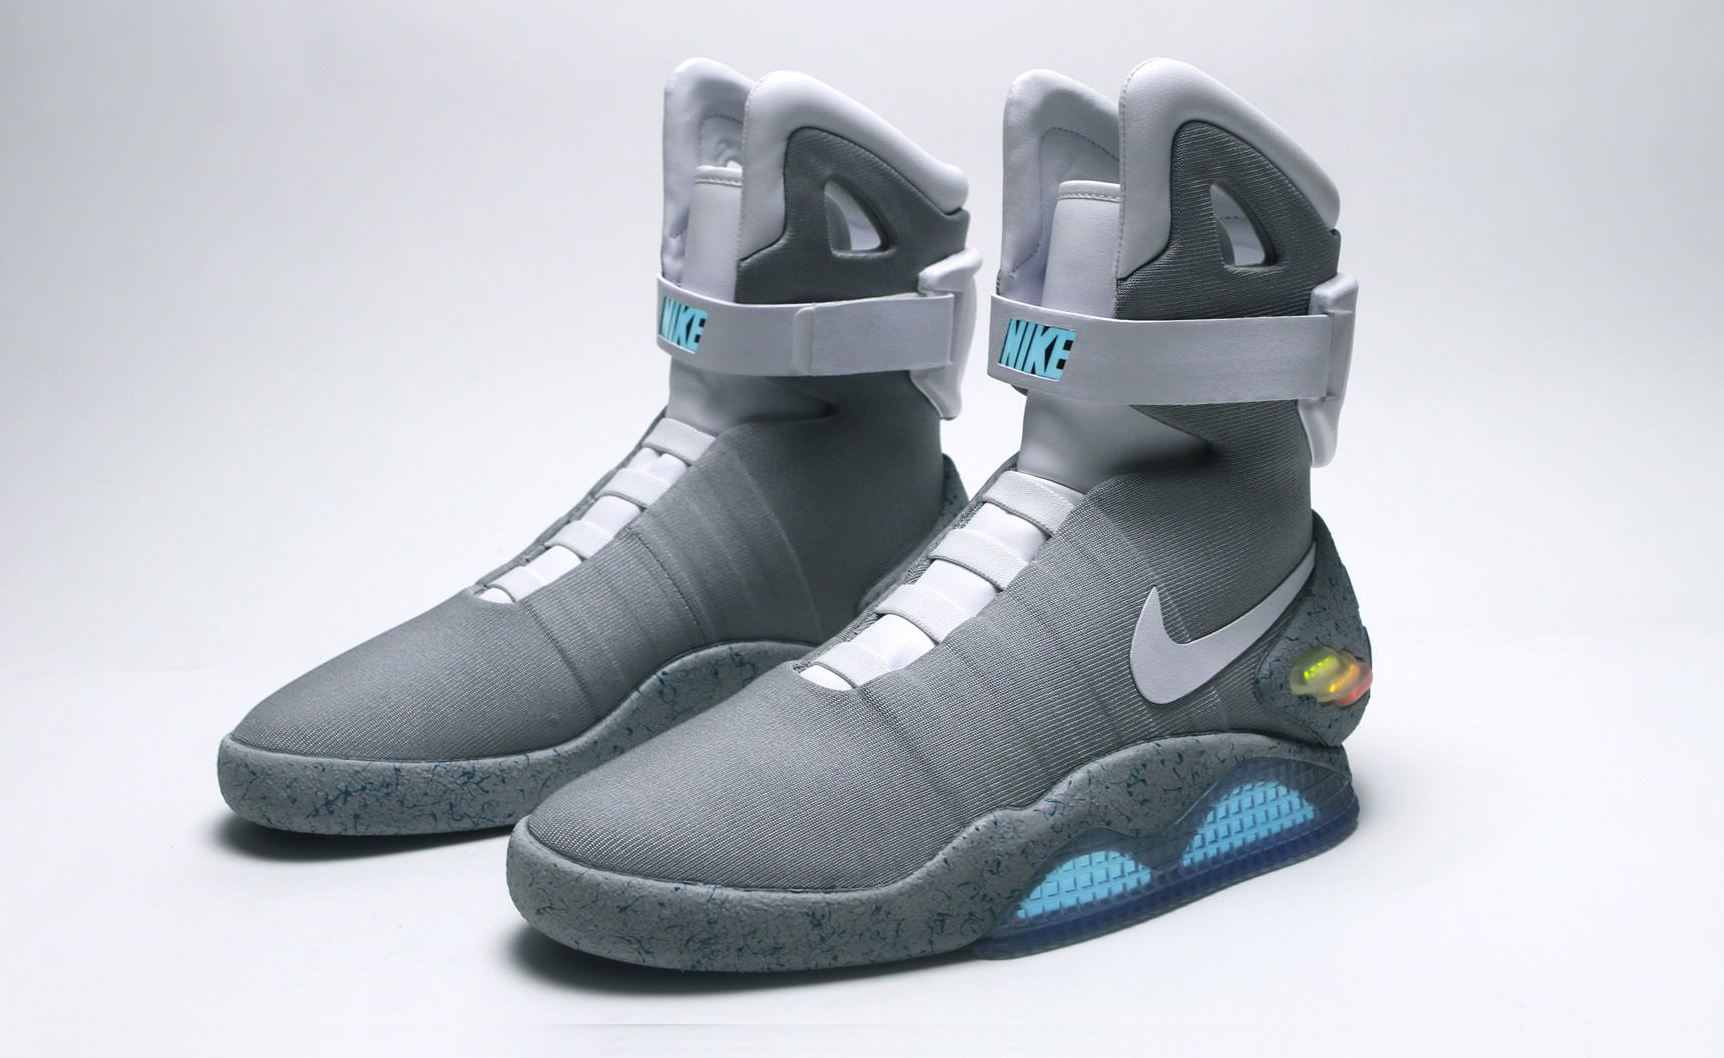 It's 2015. And Yes, It Looks Like We'll Finally Get the Nike From Back to the Future II